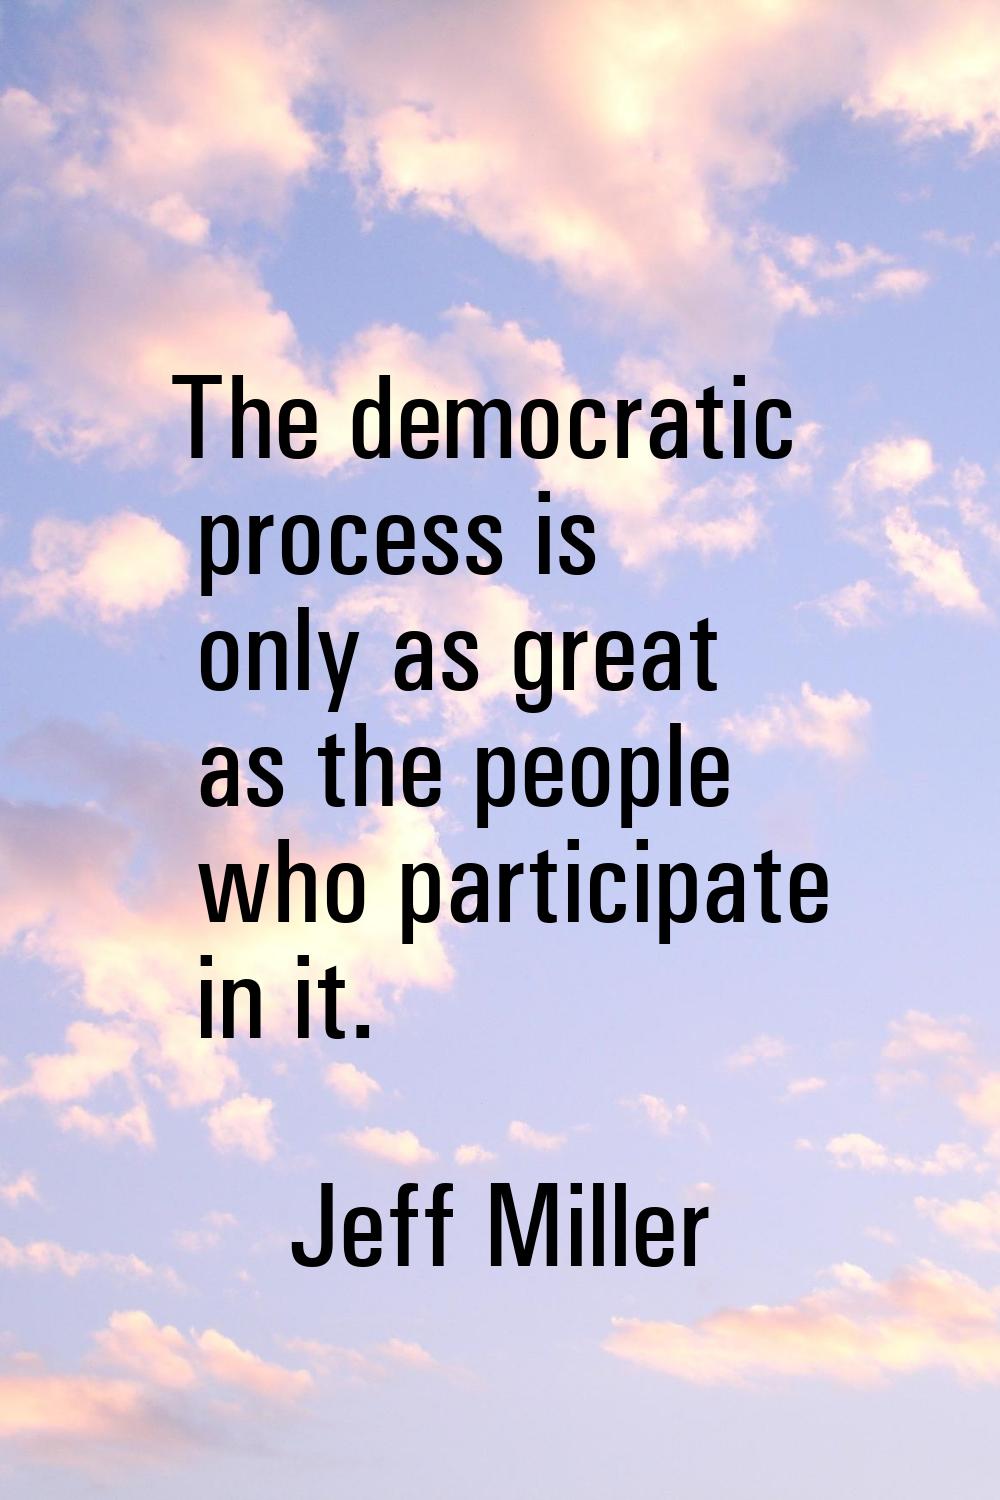 The democratic process is only as great as the people who participate in it.